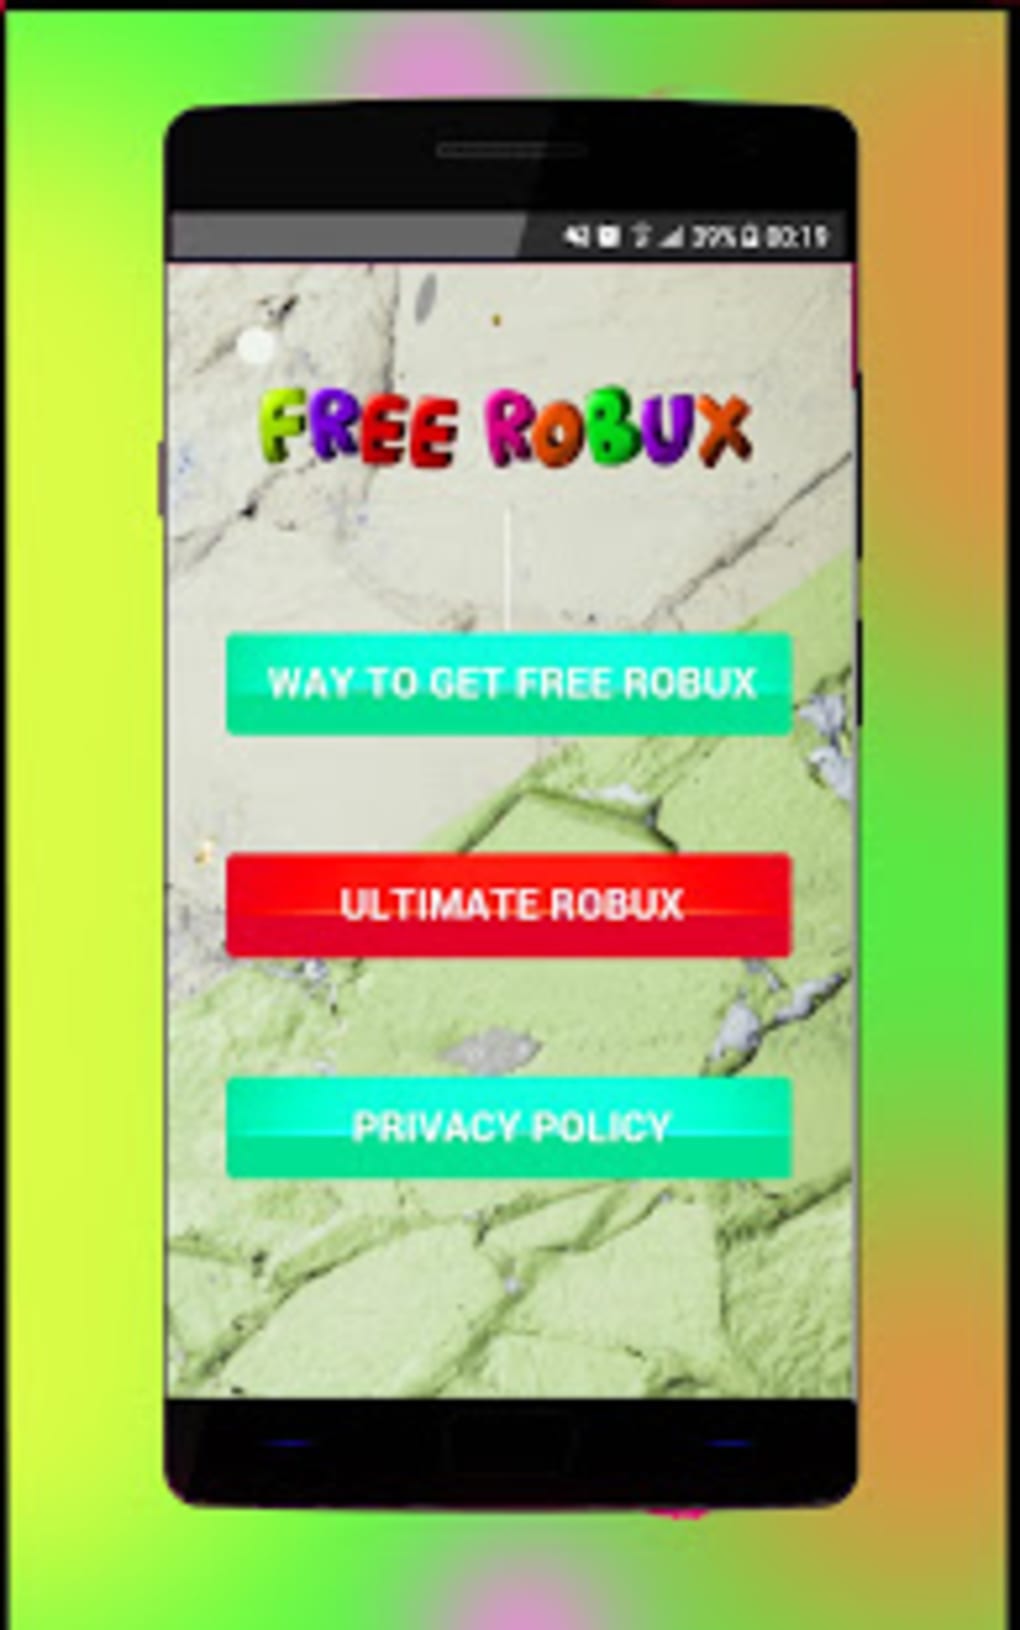 Robux Free 2019 Android